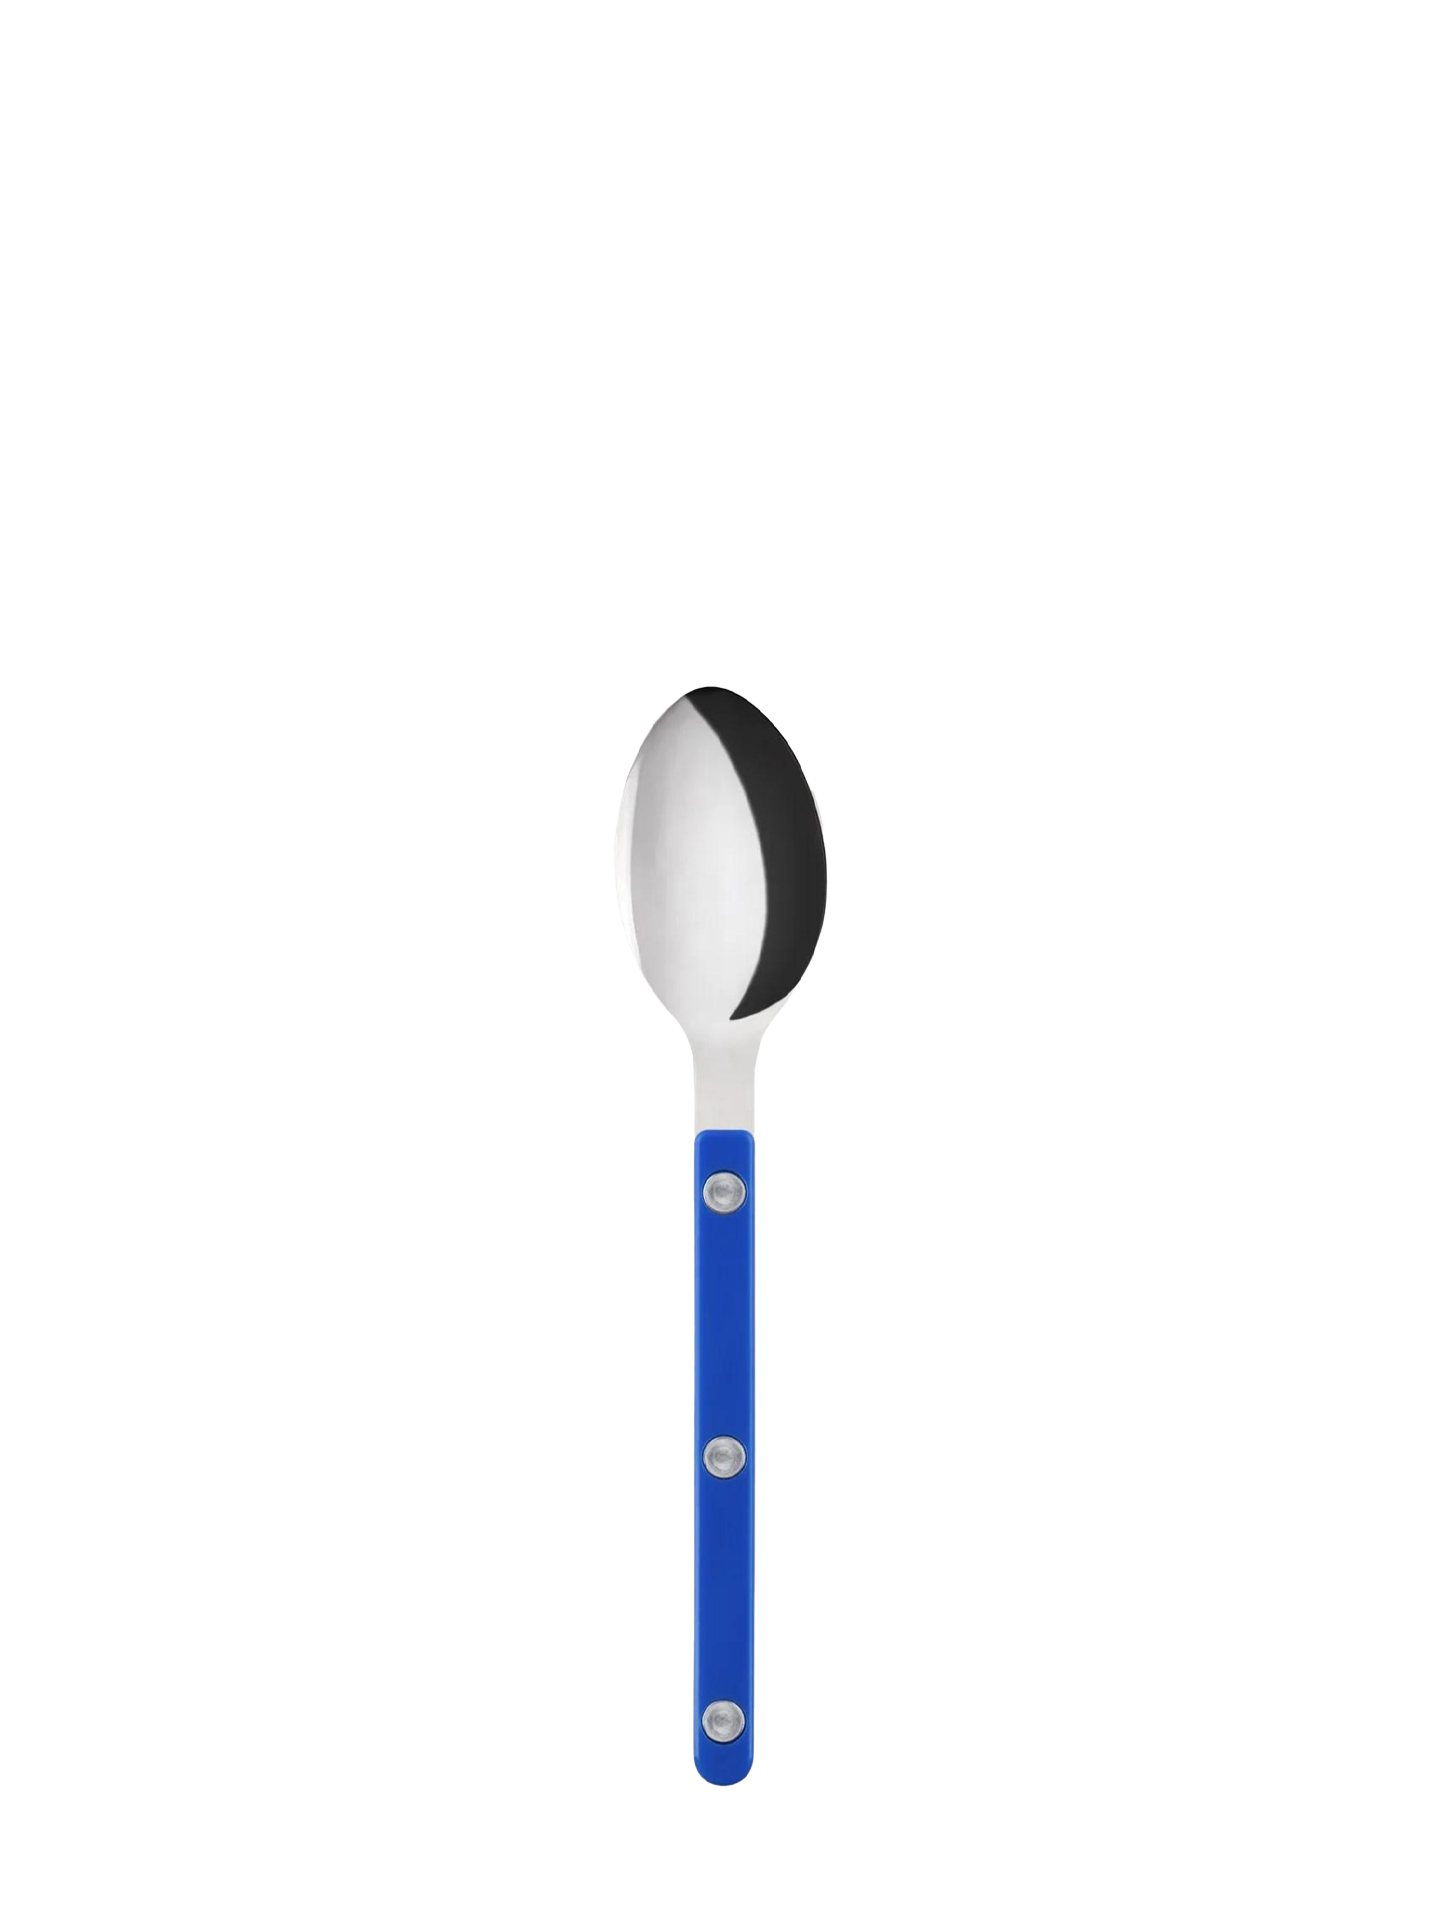 The tea spoon from the Bistrot collection in lapis blue is a new interpretation from the cutleries of the Parisian cafés and bistros. Stylish and fun, still practical and minimalist, this will fit perfectly with contemporary looks with just little spoonful of French chic.